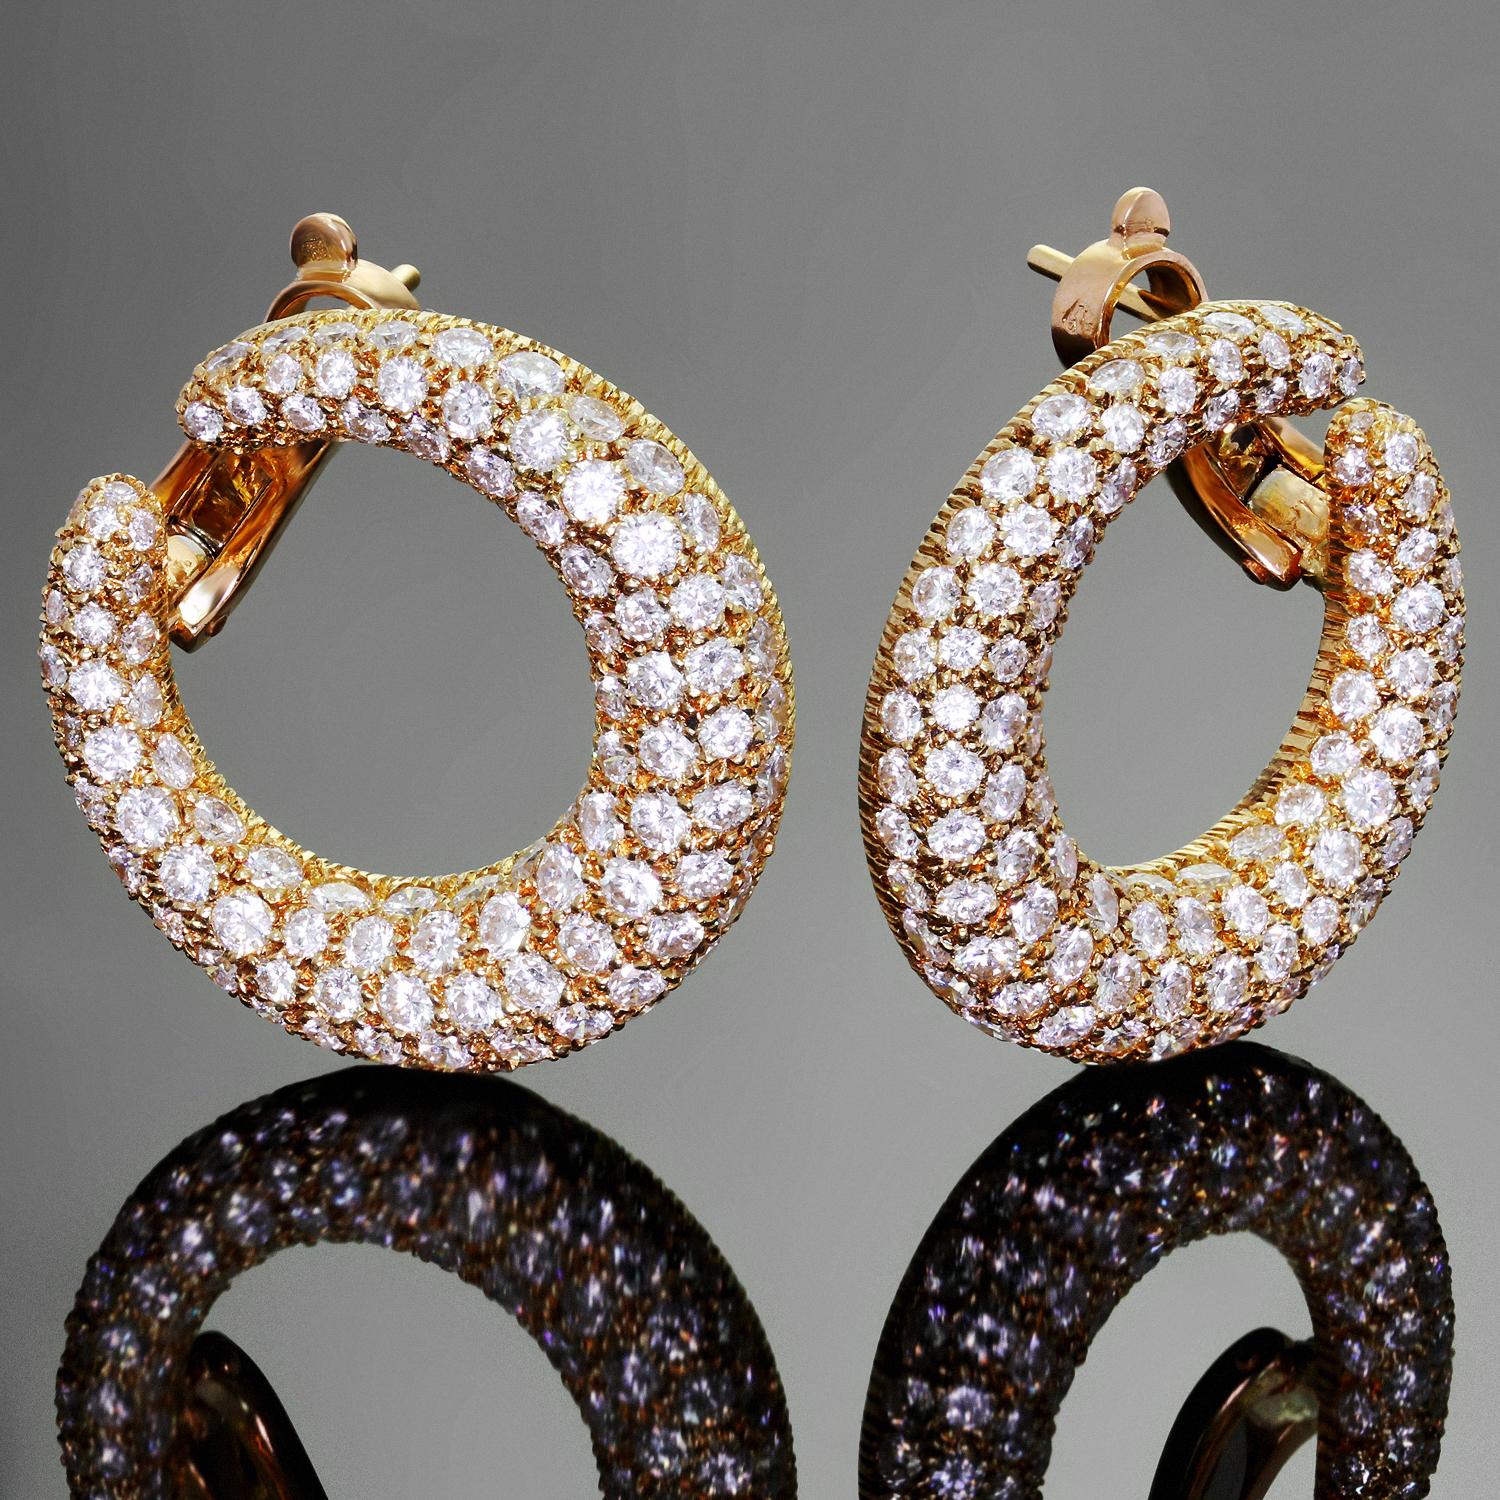 These iconic Cartier earrings feature a sparkling hoop design crafted in 18k yellow gold and set with briliant-cut round D-E VVS1-VVS2 diamonds of an estimated 6.50 carats. Completed with lever backs and posts for pierced ears. Made in France circa